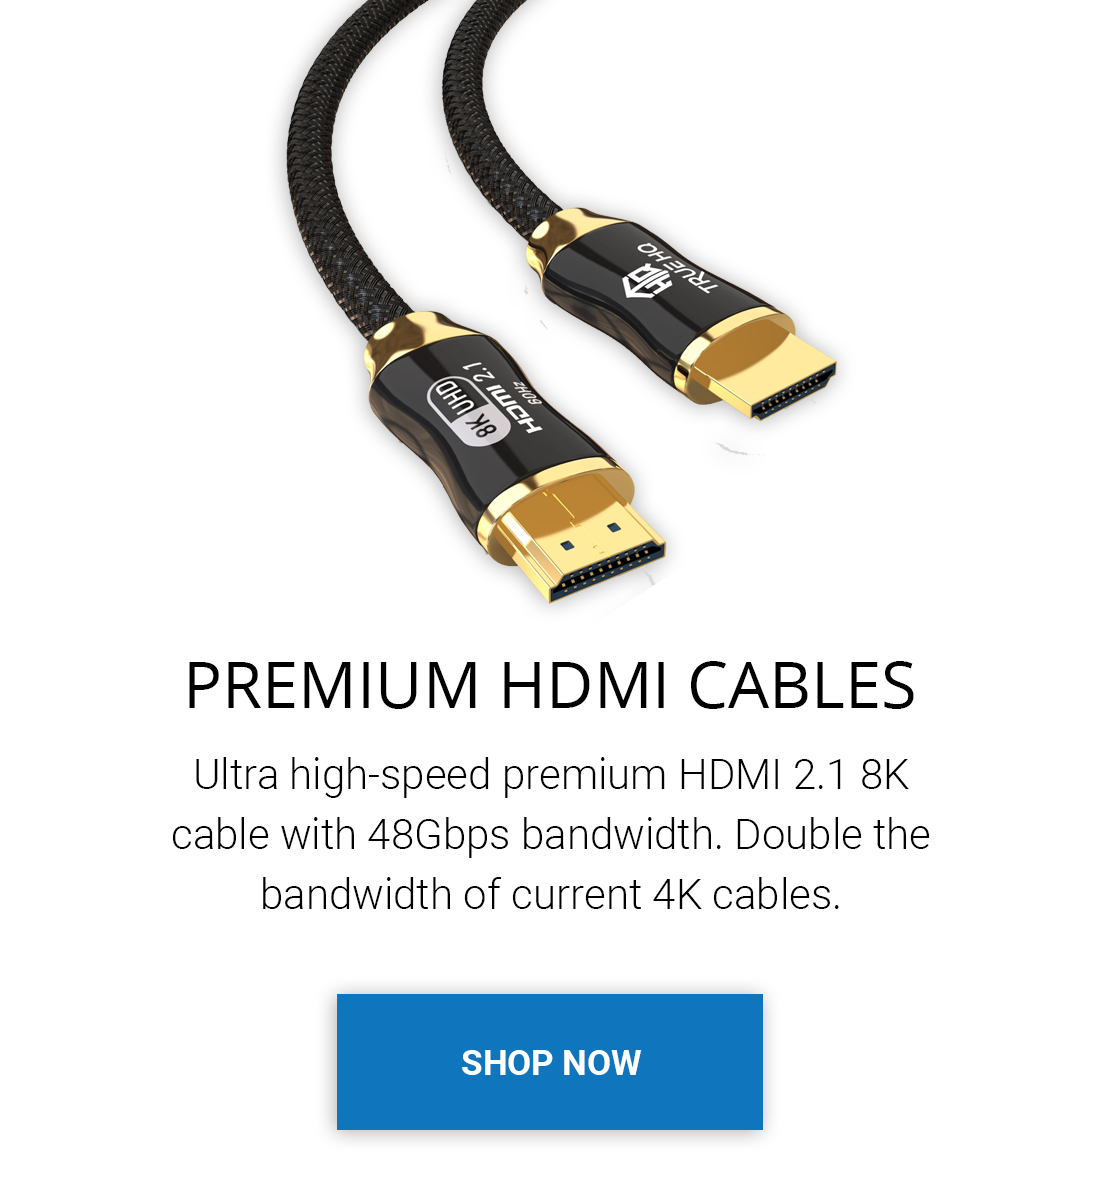 True HQ - Cable Specialists - Buy High Quality HDMI Cables